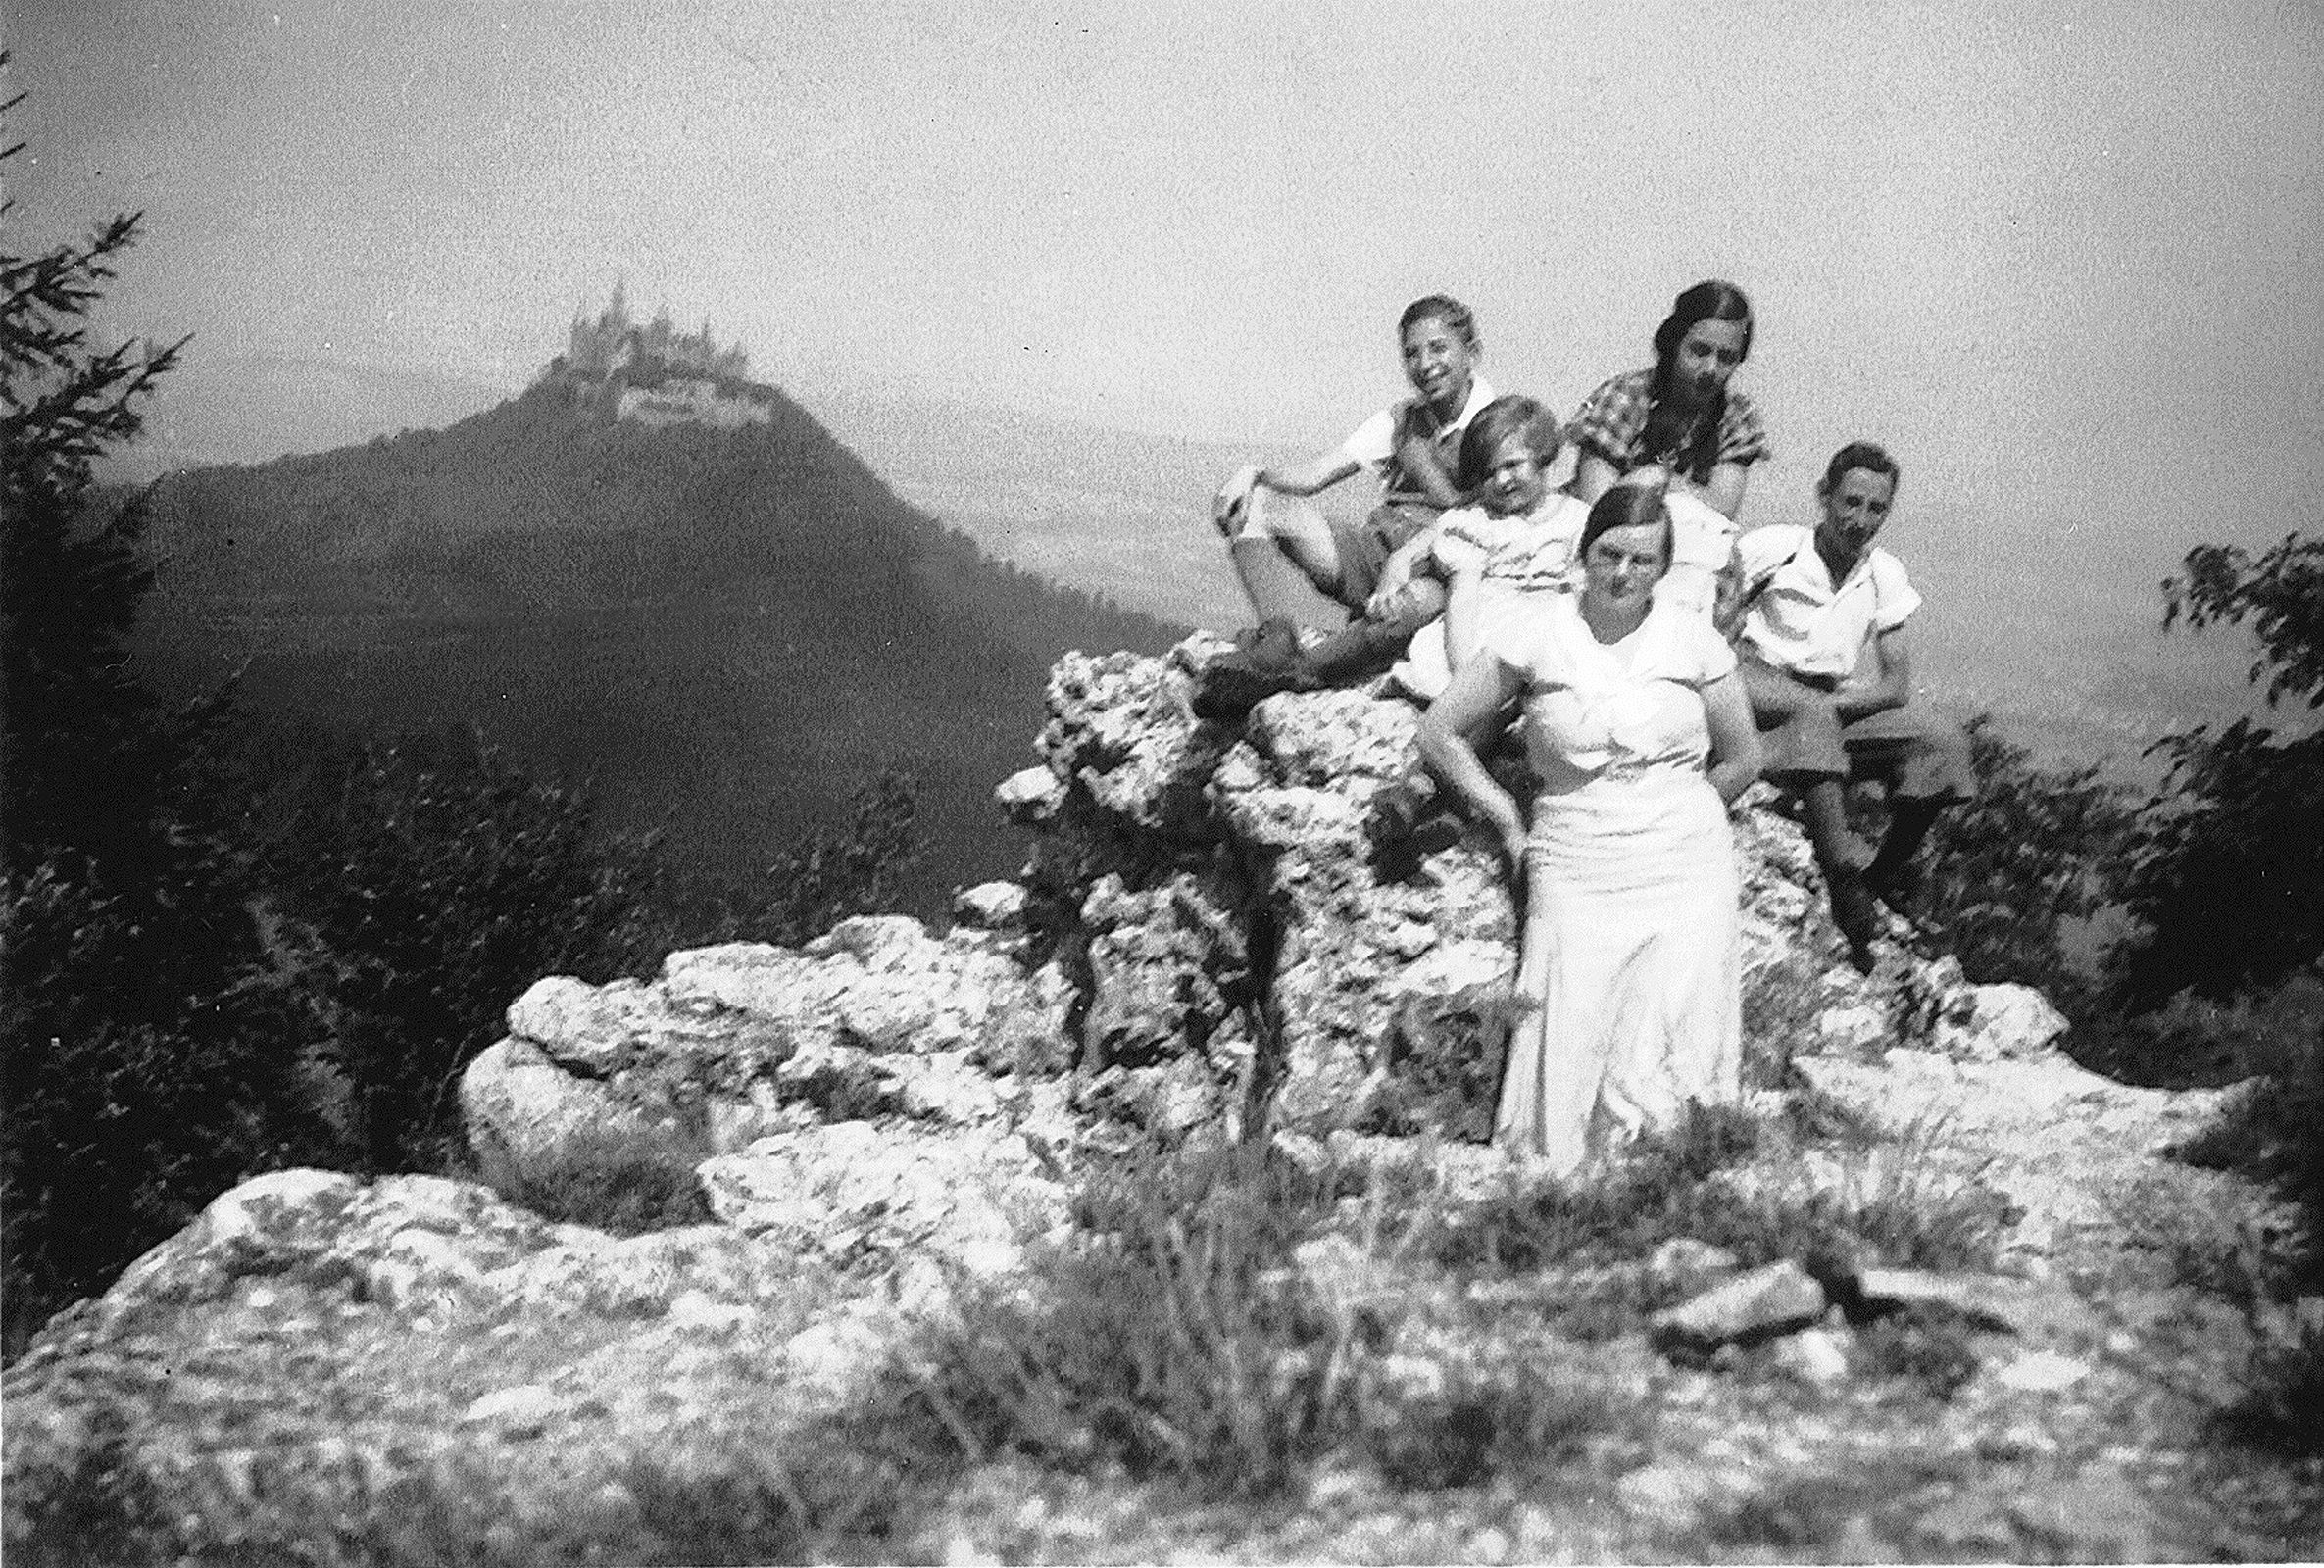 The picture shows, from the left, Manfred with the Jewish children Hanni Hamburger, Ruth Schmalzbach and Martin Eppstein and in front the Christian friend Anna Christina Gräff during a trip to the Zeller Horn in 1937.